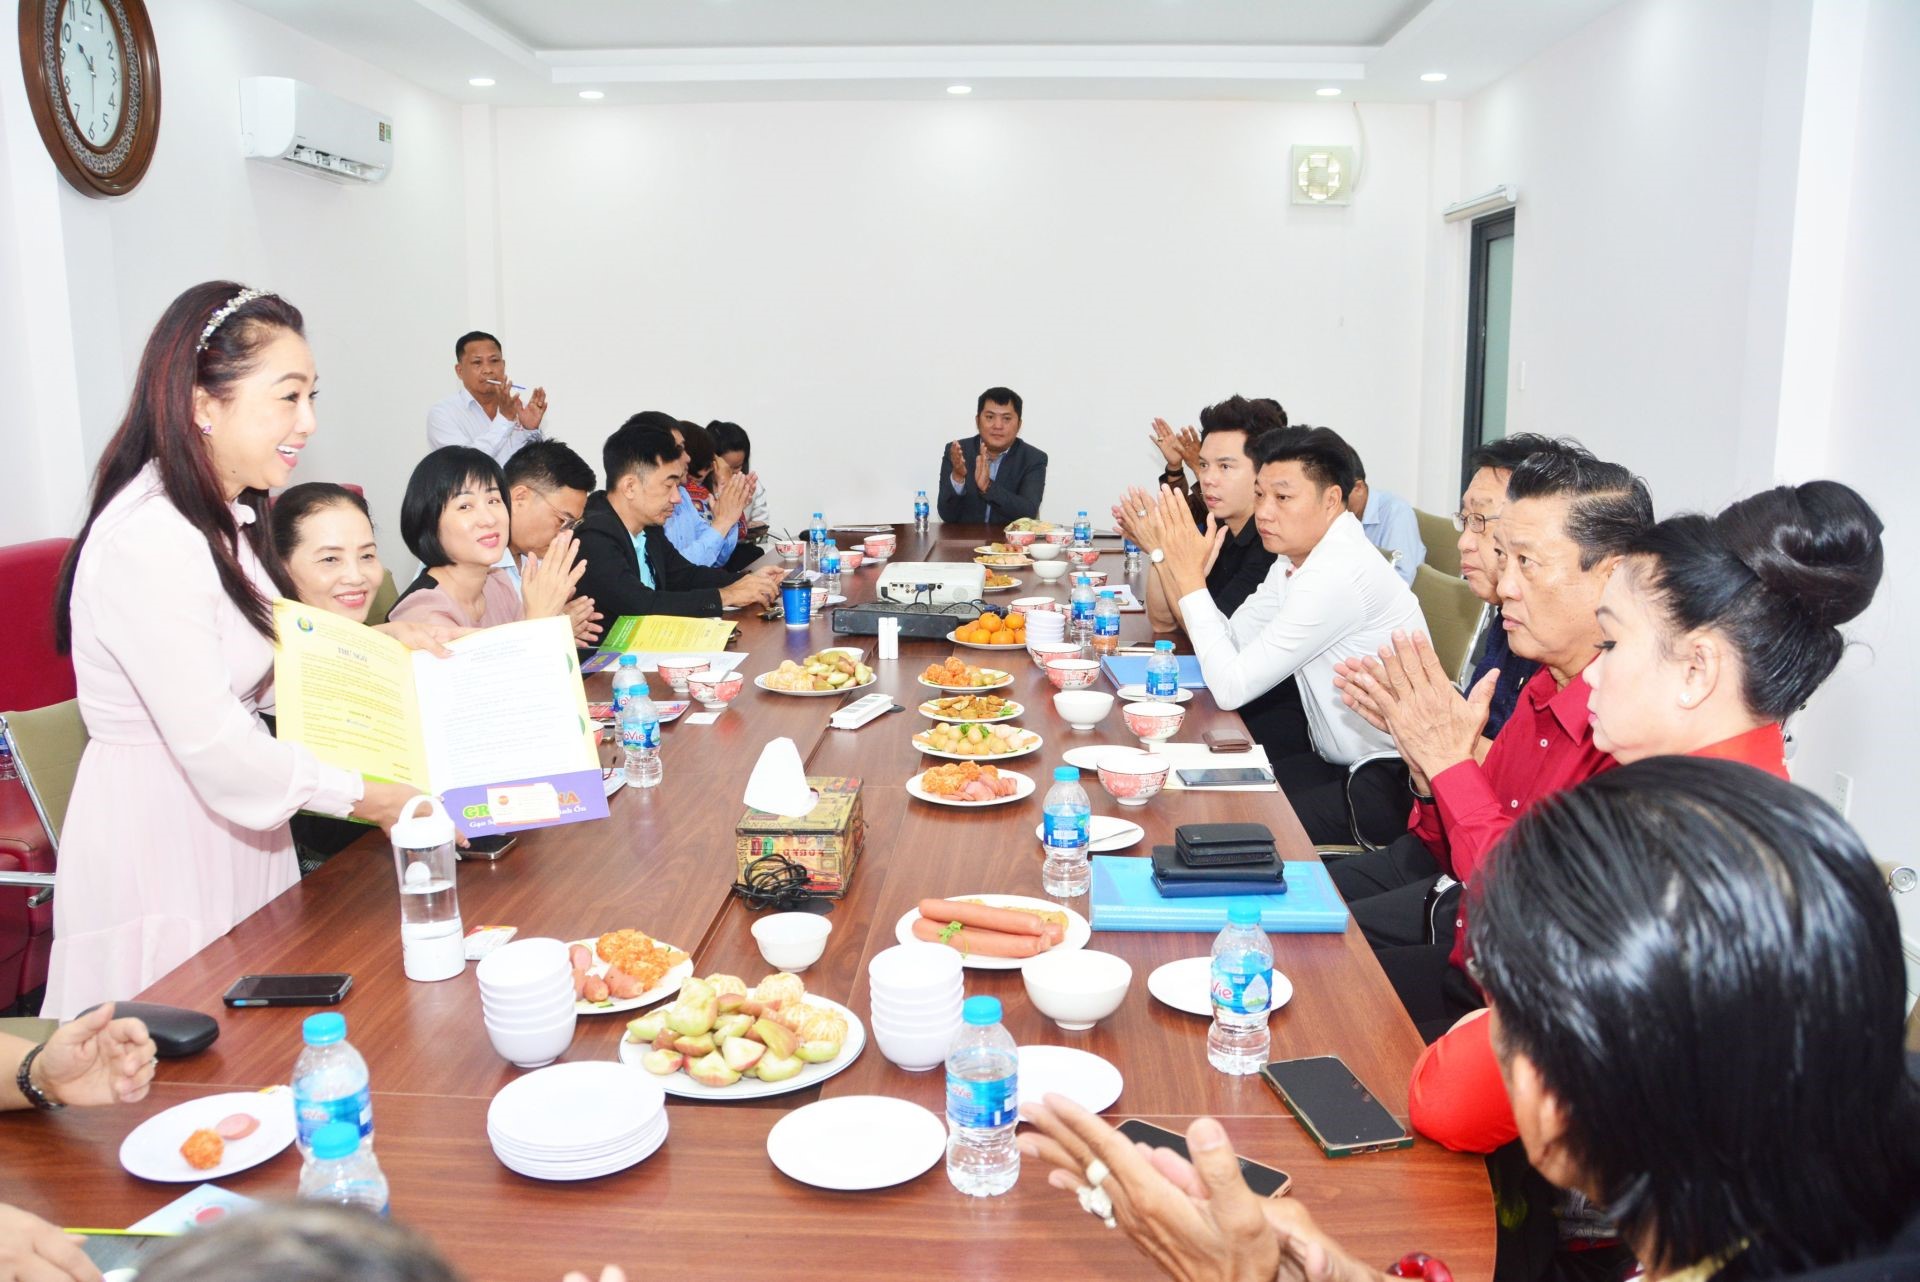 The Board of Directors of HAMBURGER KOBE Food Processing Joint Stock Company met with the Board of Directors of Viet Sin Food Industry Joint Stock Company.